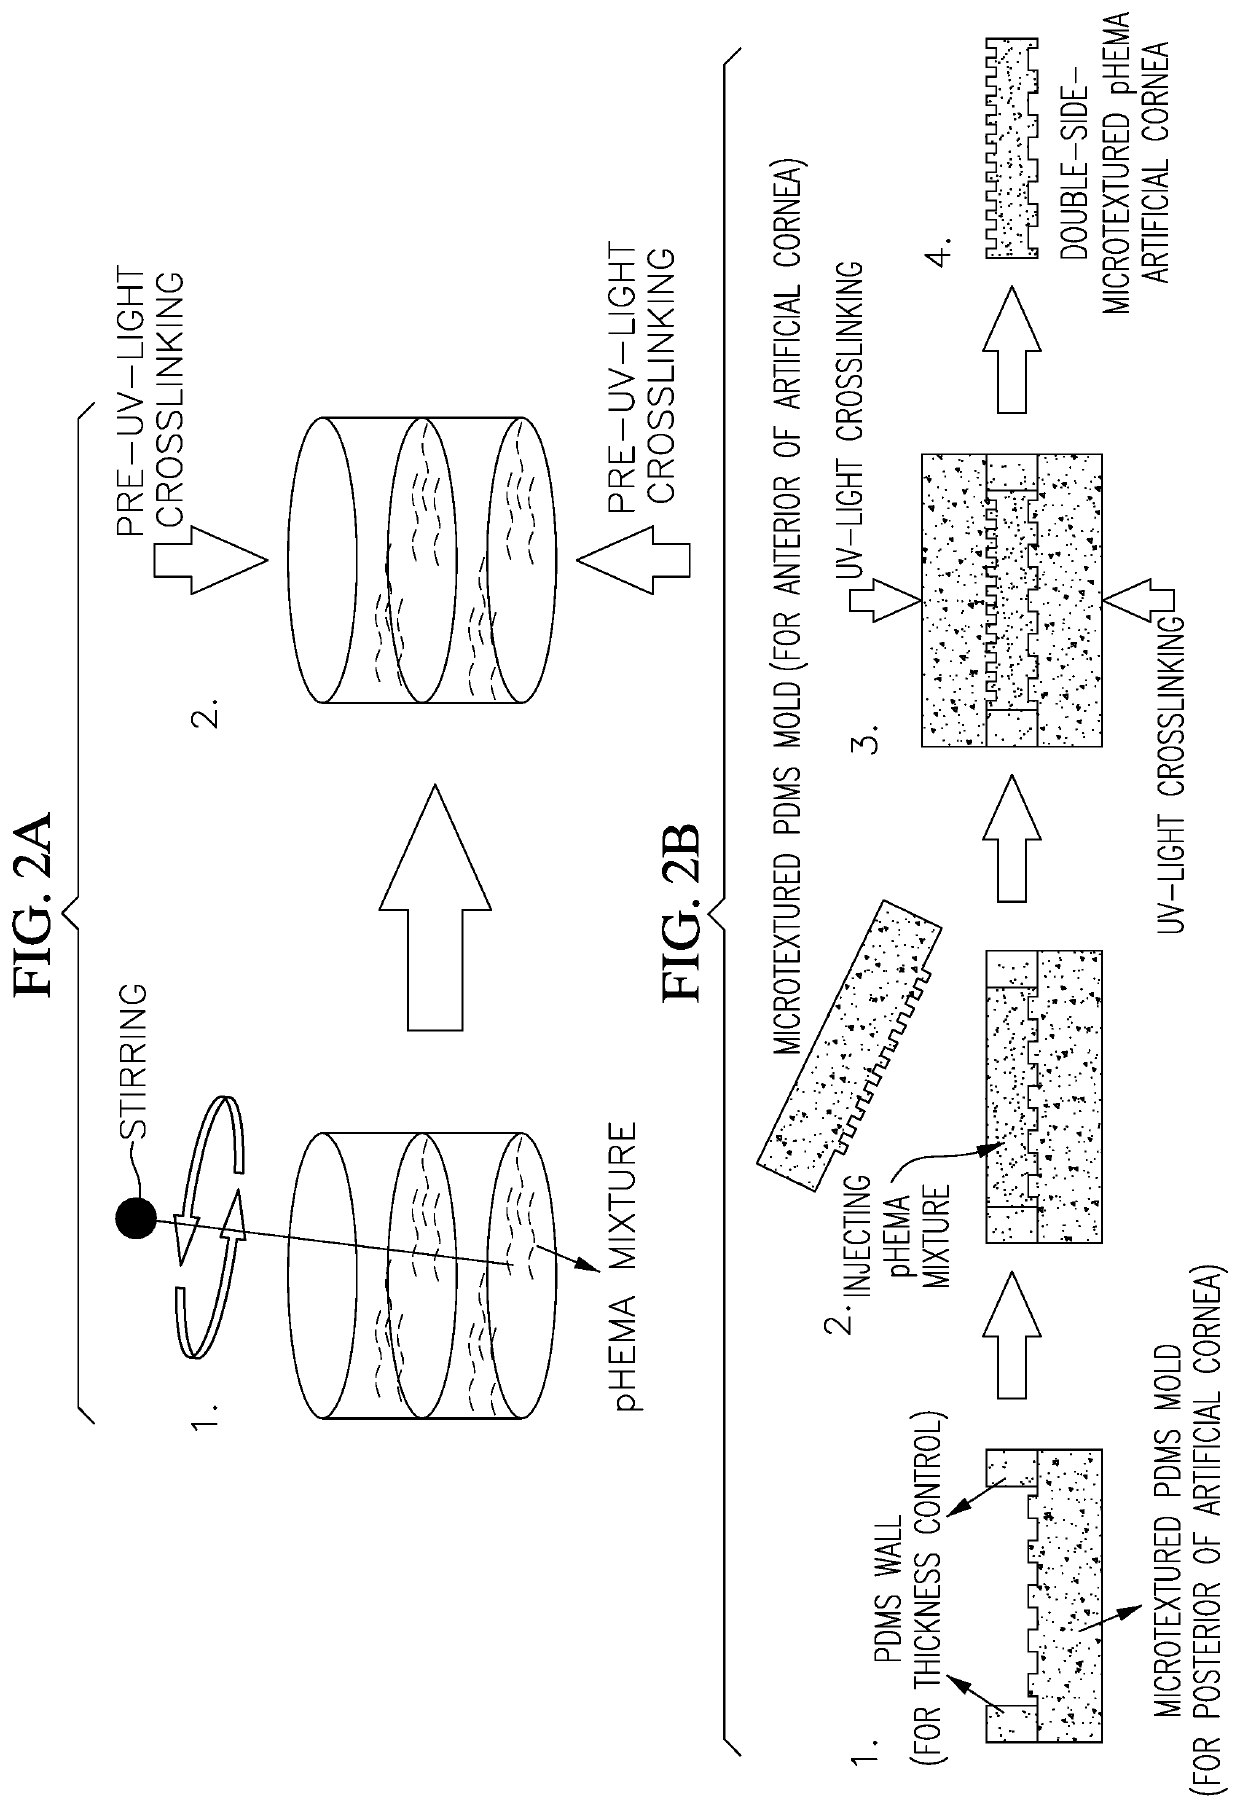 Artificial Cornea with Double-Side Microtextured pHEMA Hydrogel